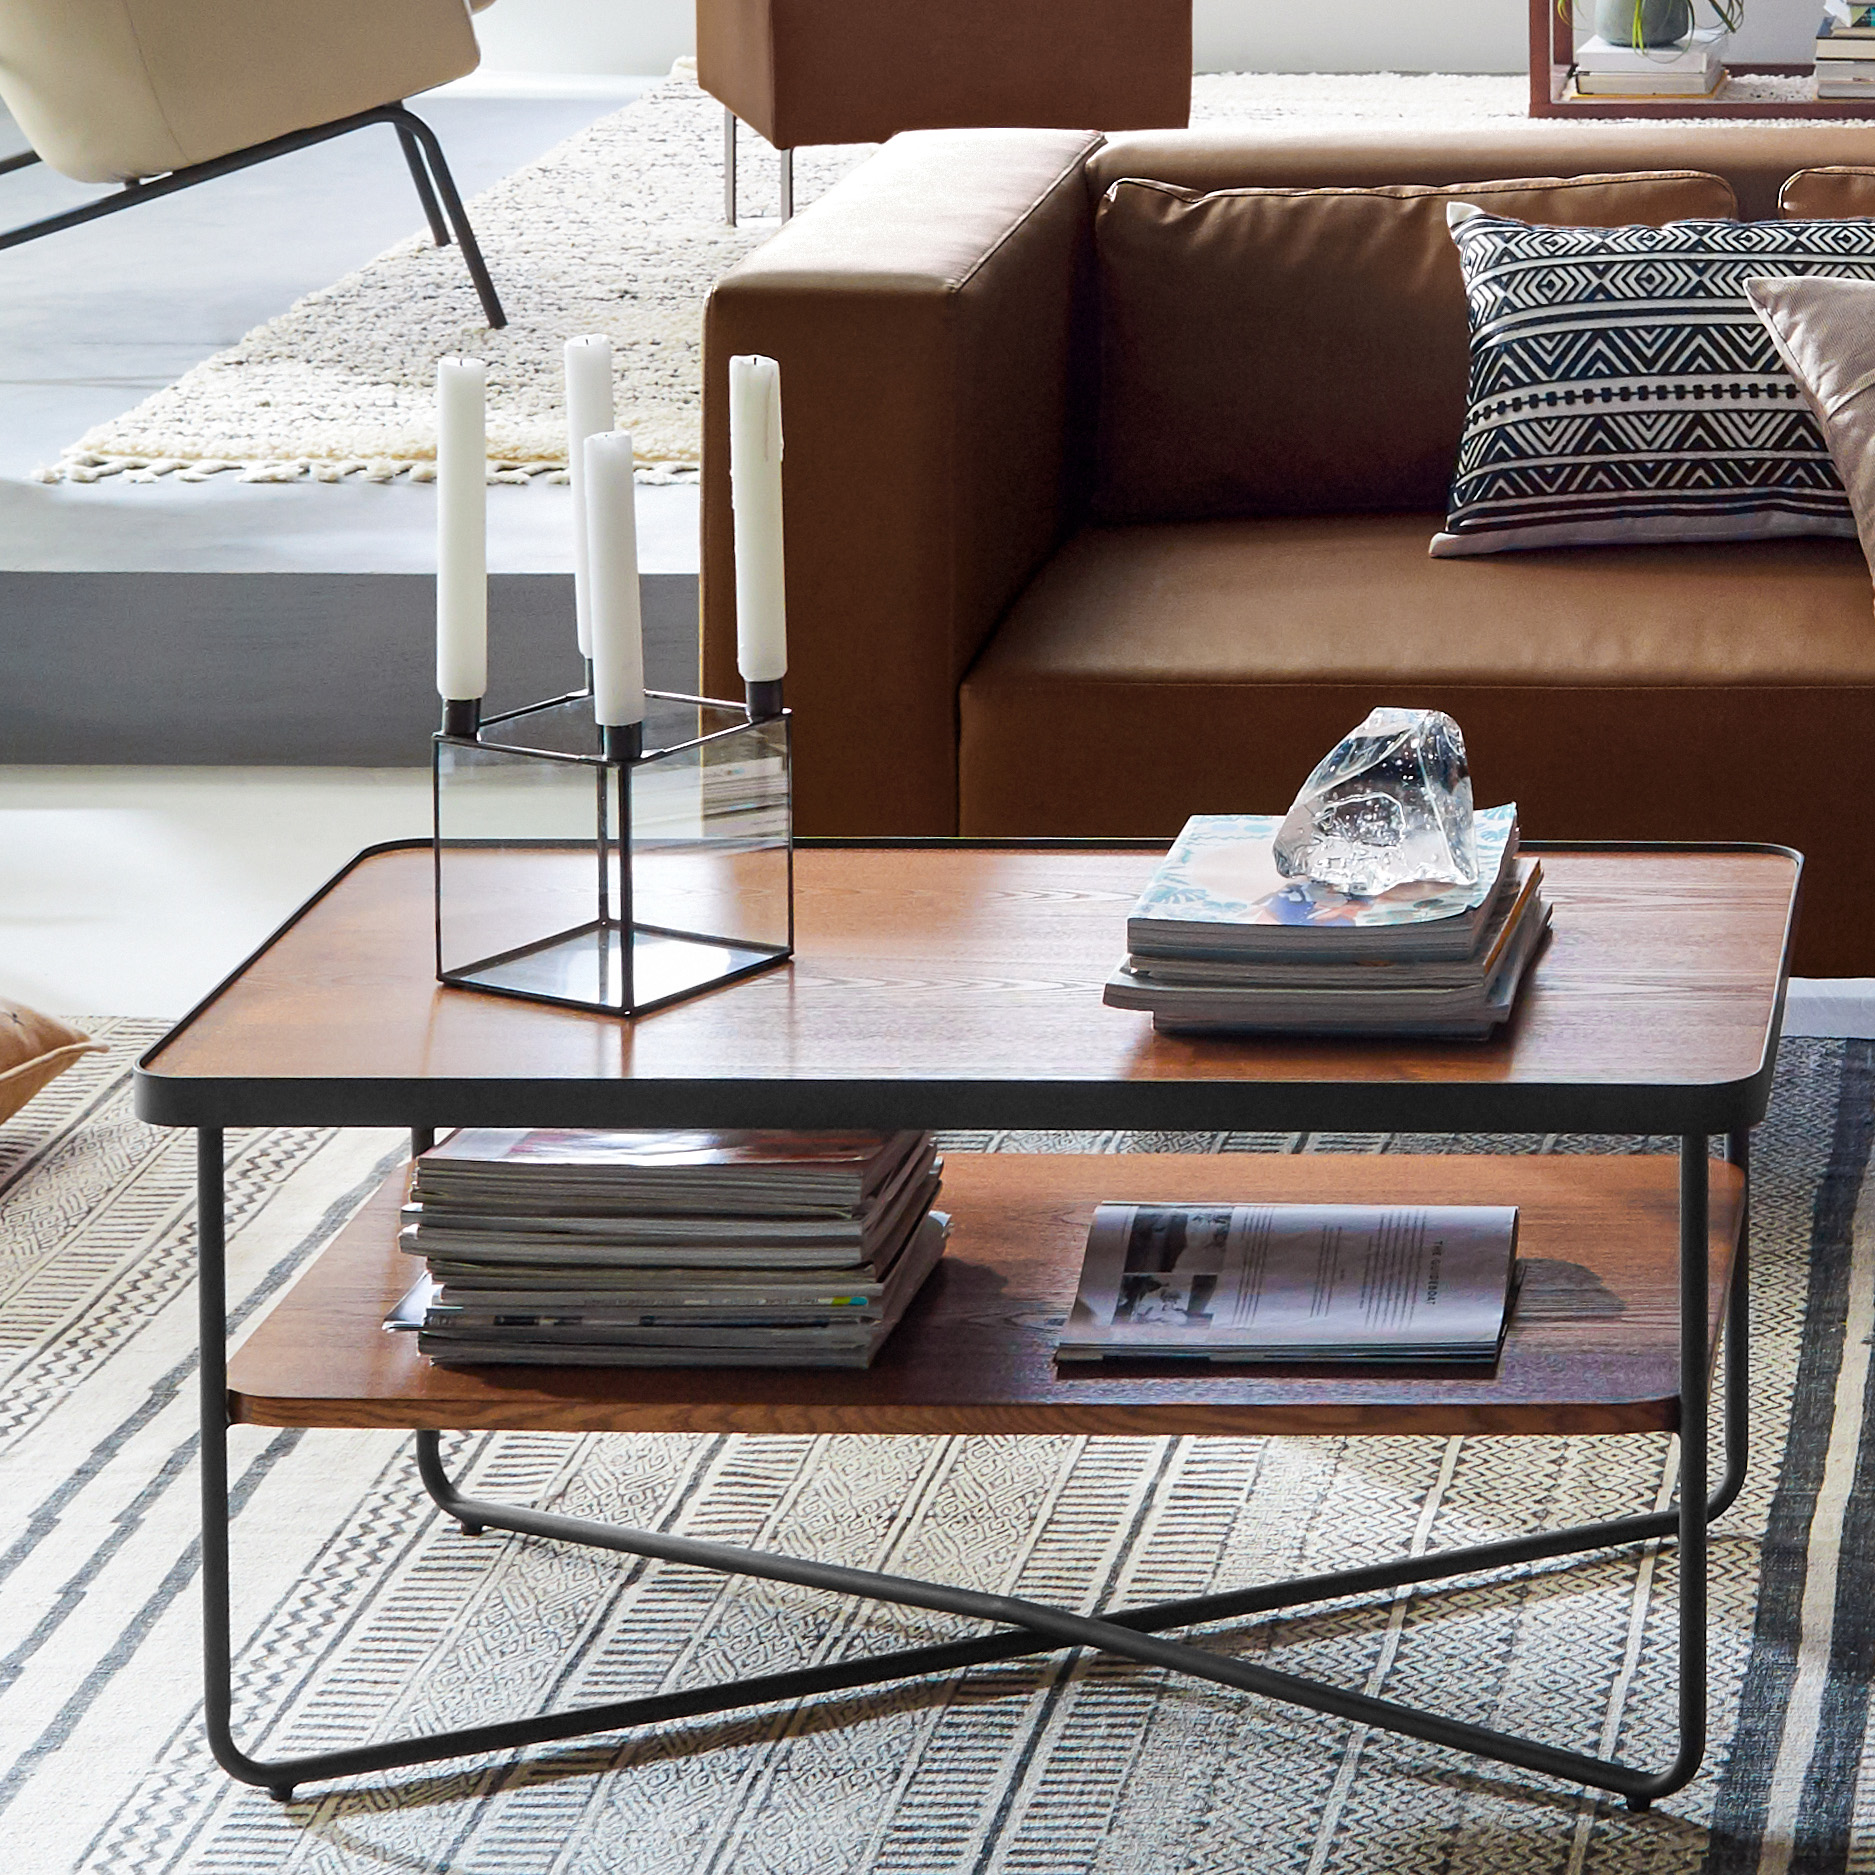 MoDRN Industrial Callen Coffee Table - Walnut and Charcoal Gray - image 1 of 12